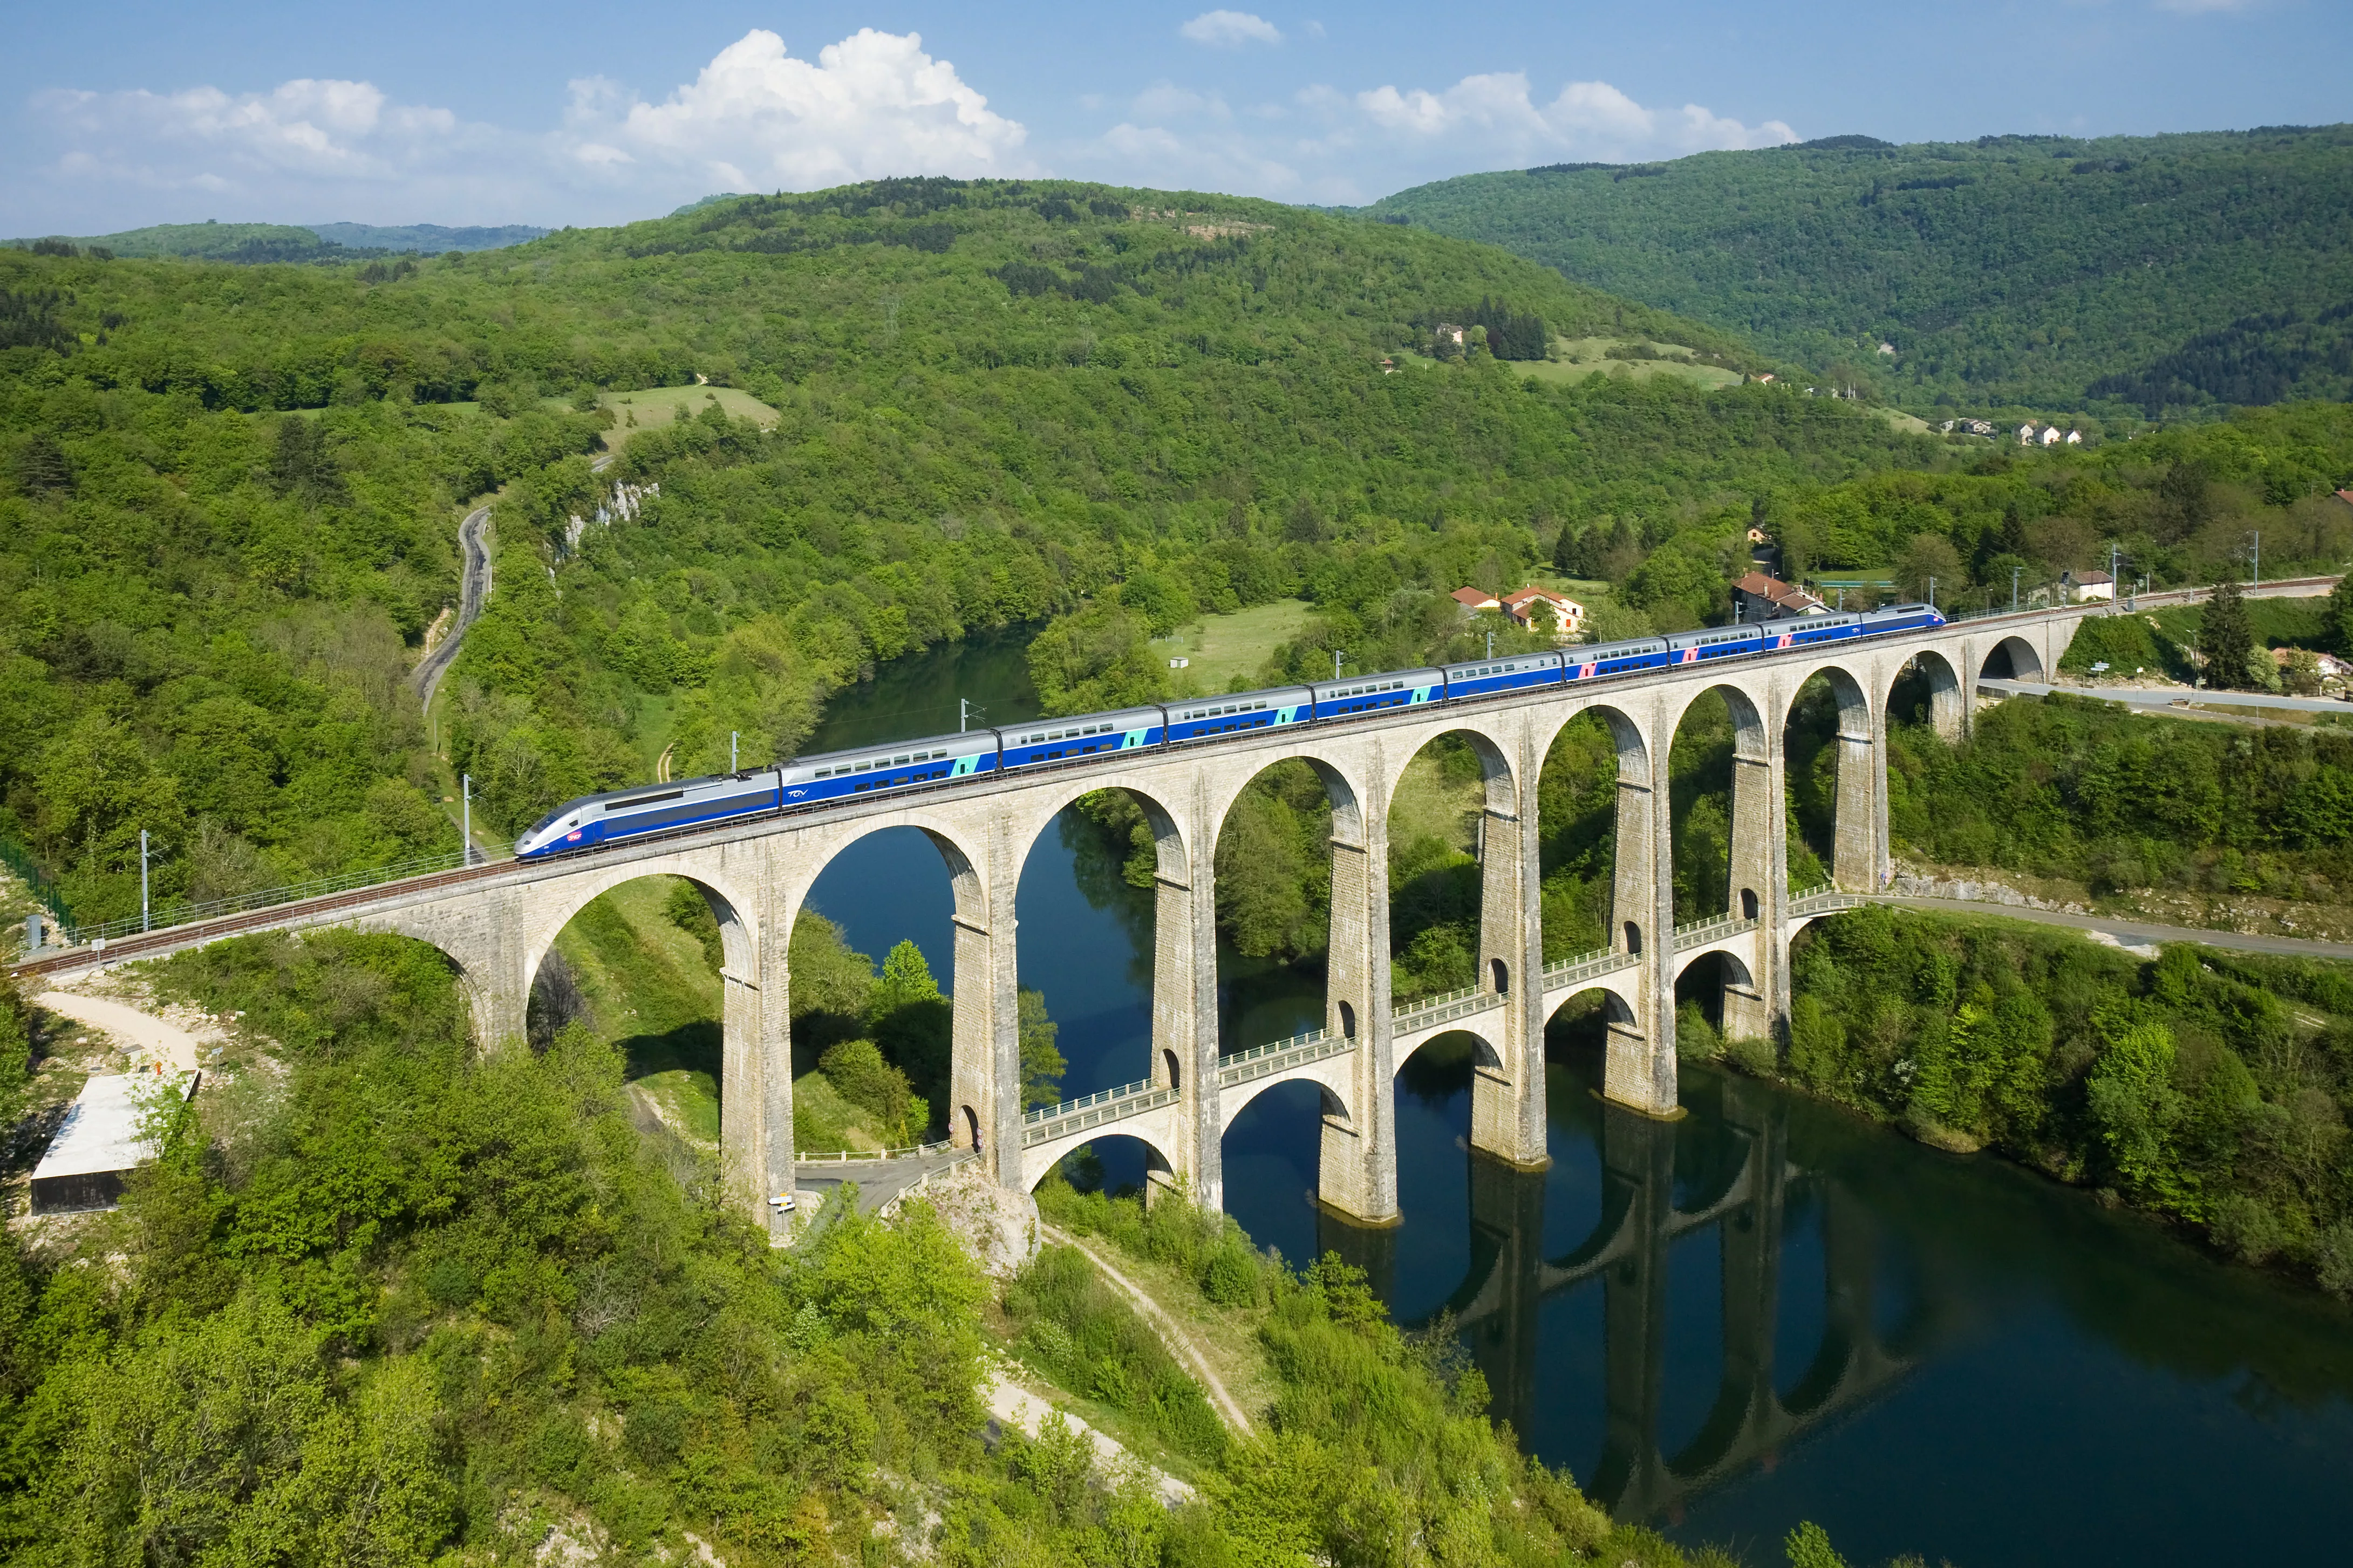 Free Water Aqueduct in Portugal, Europe | Architecture - Rated 3.6